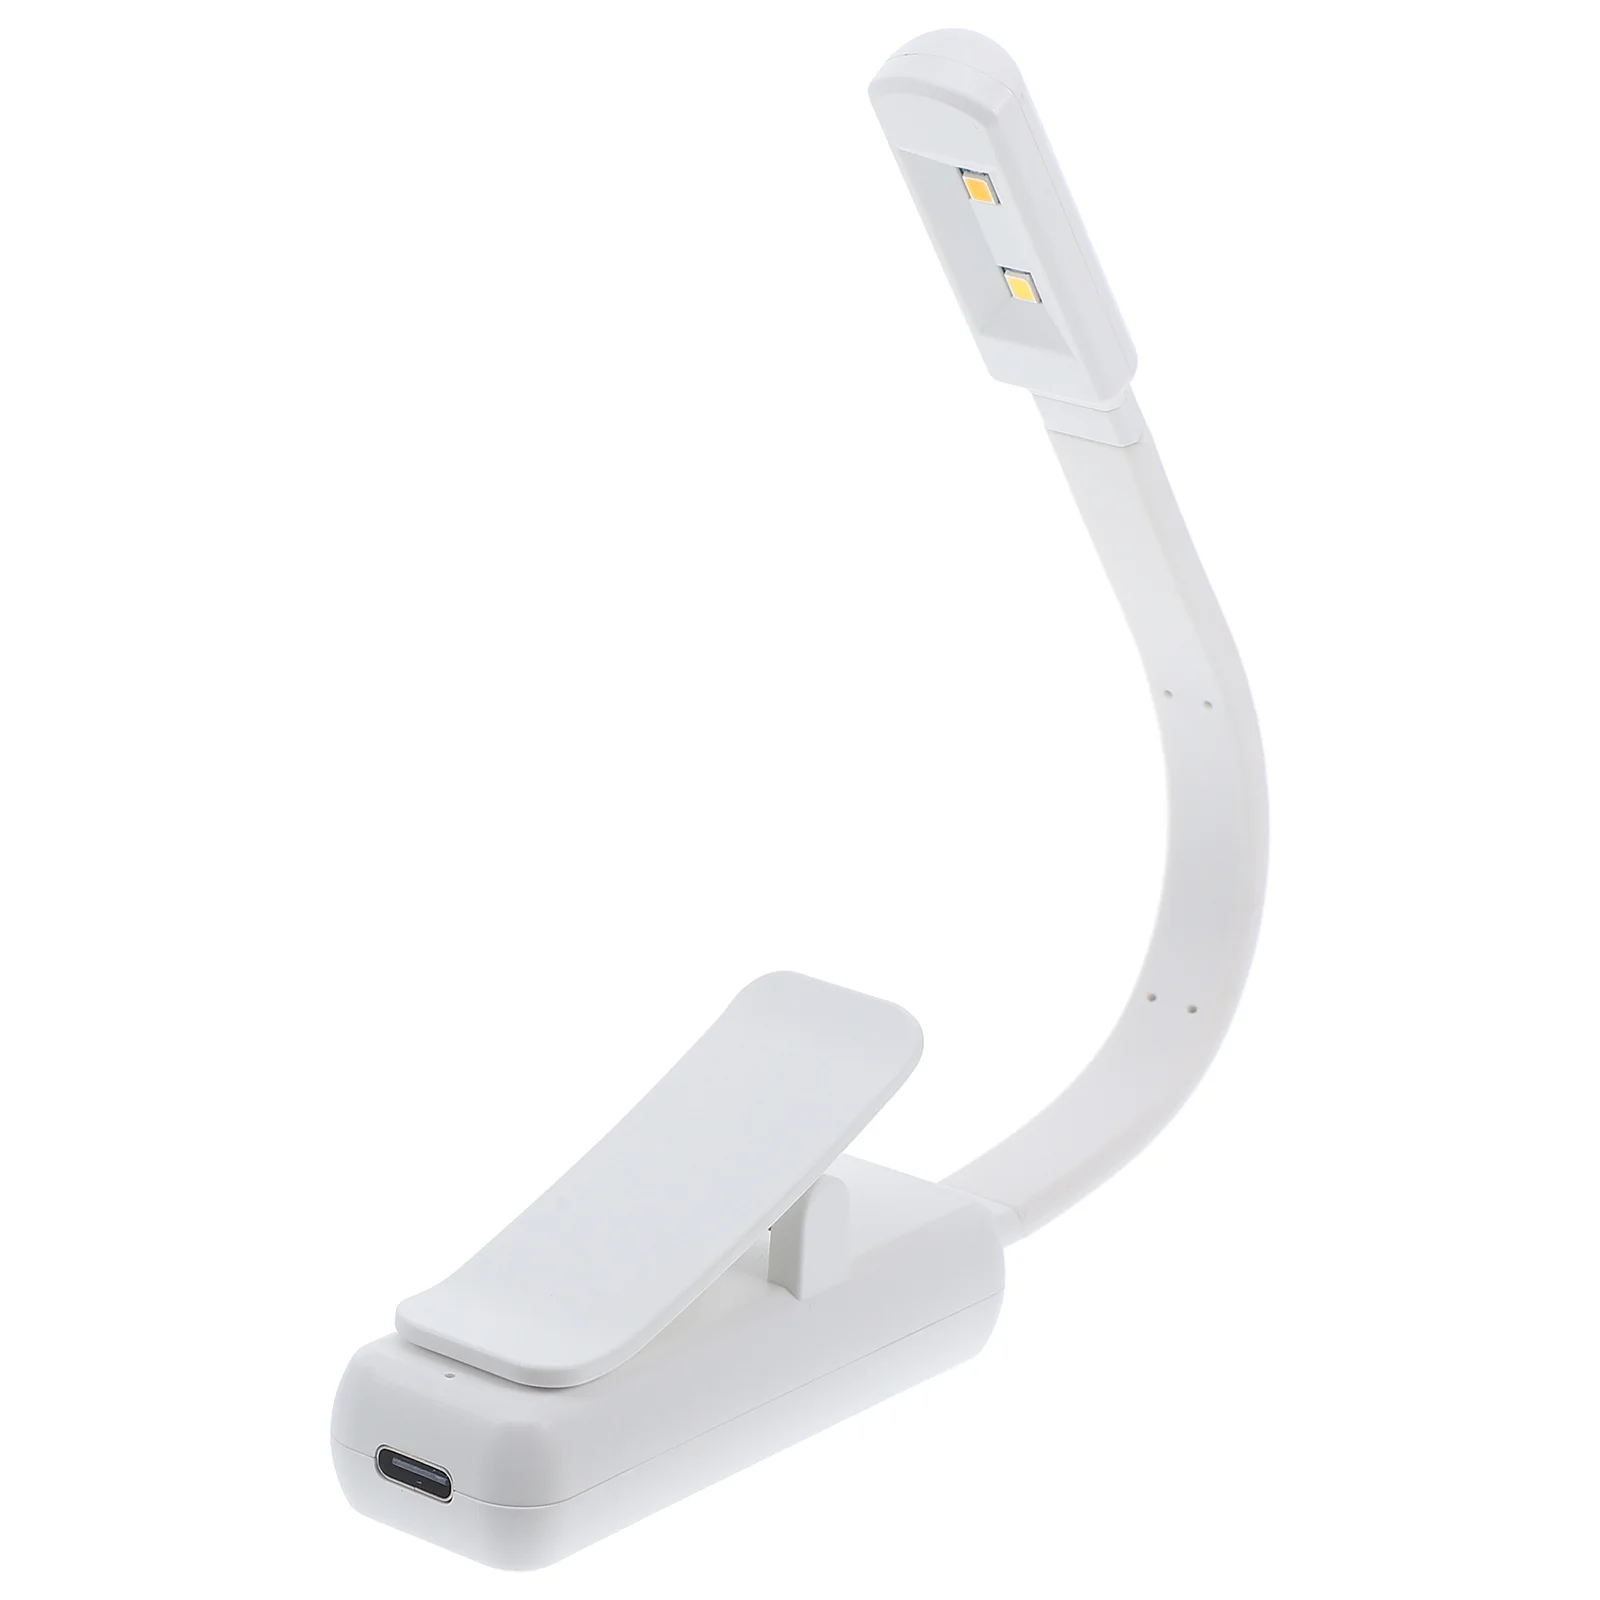 

LED Book Light Dimmable Reading Light Clip on Book Light Rechargeable Flexible Reading Light